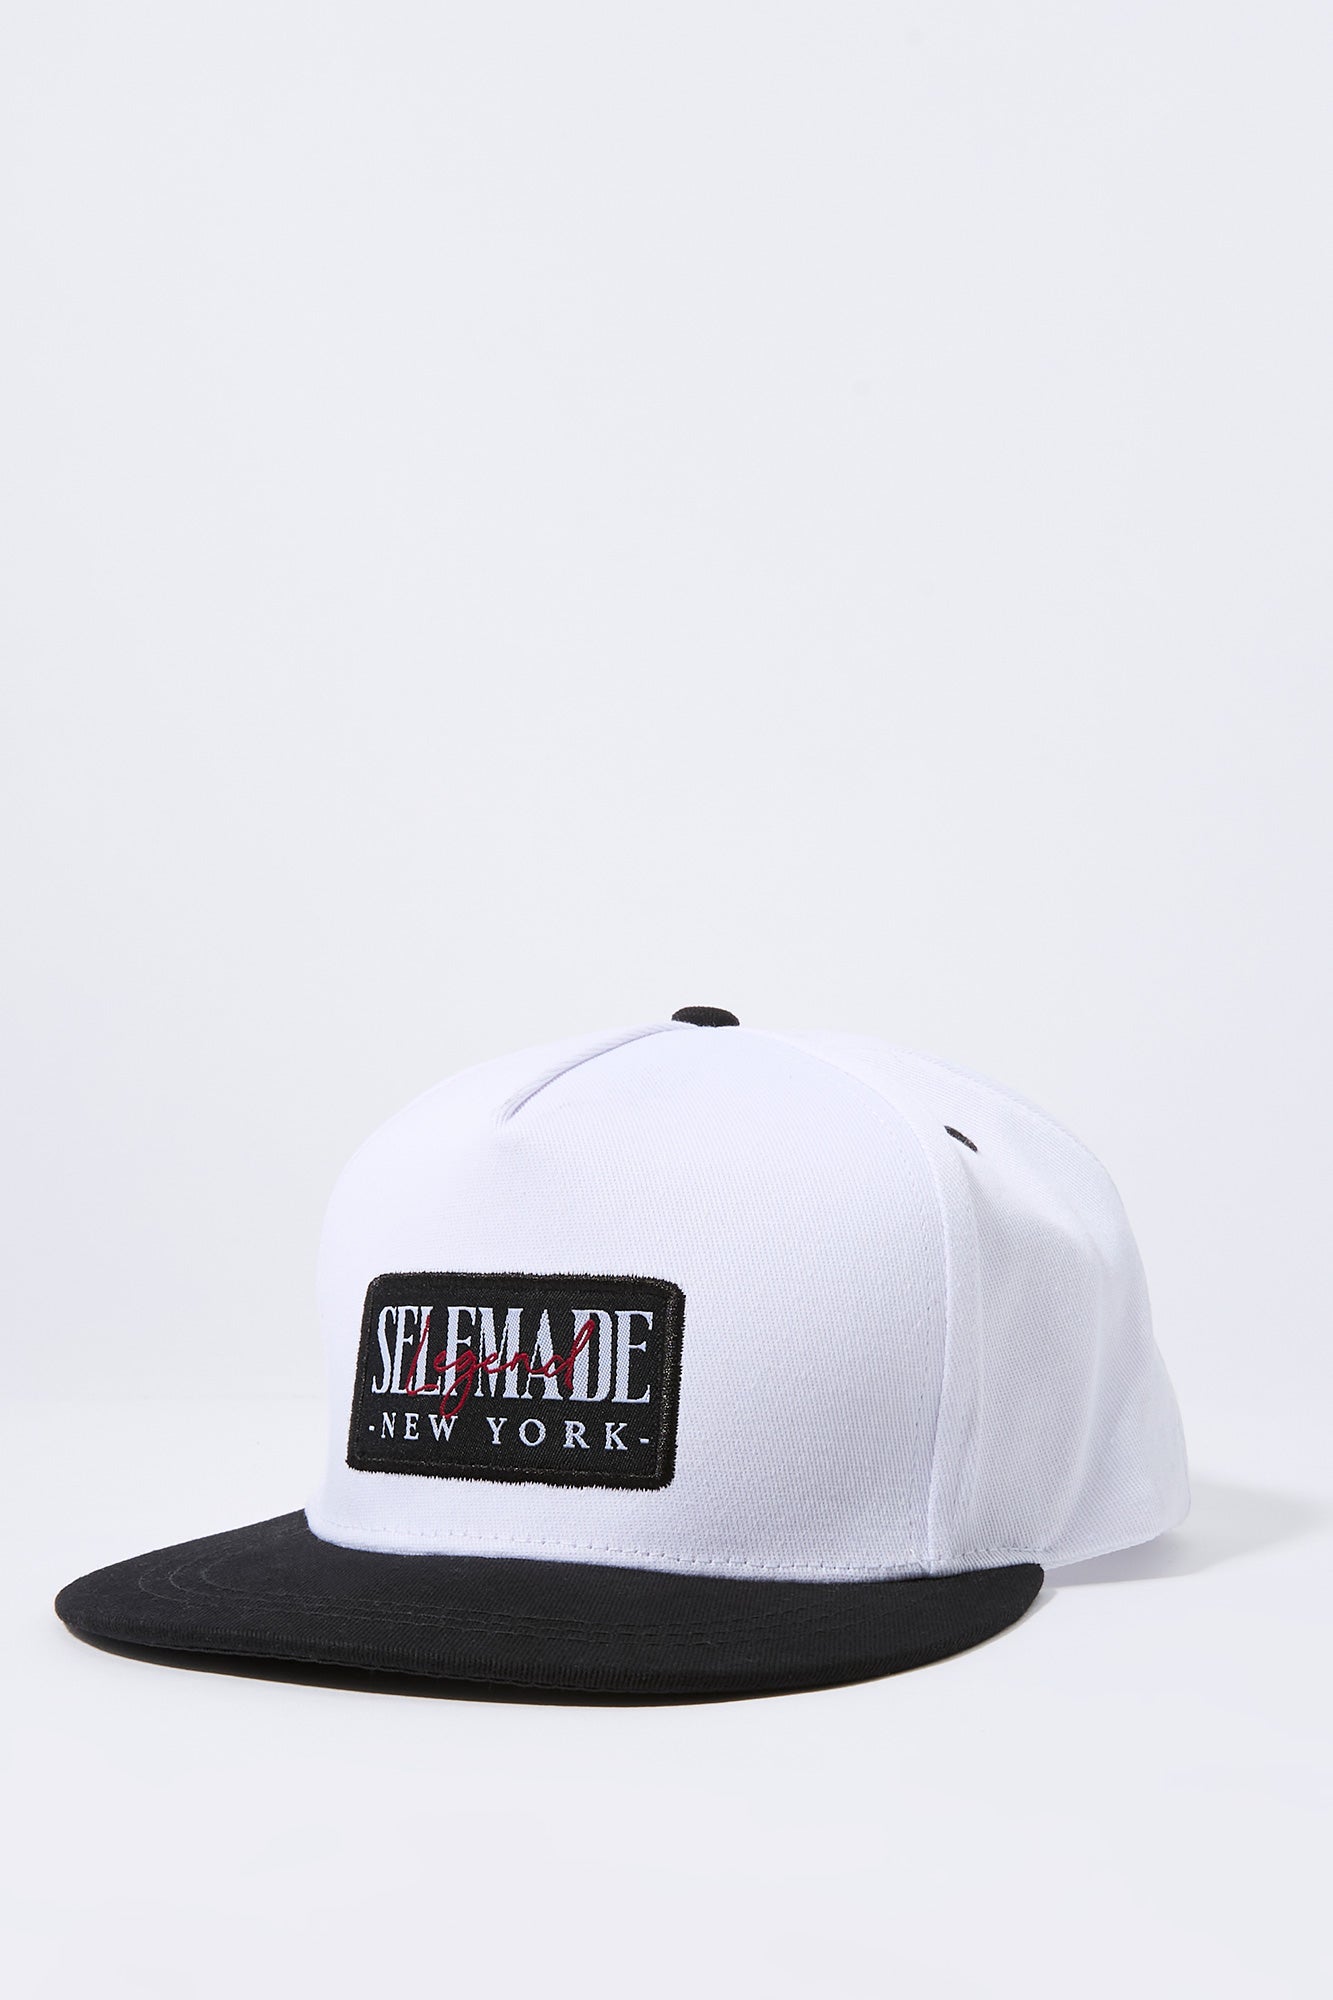 Self Made New York Embroidered Snapback Hat